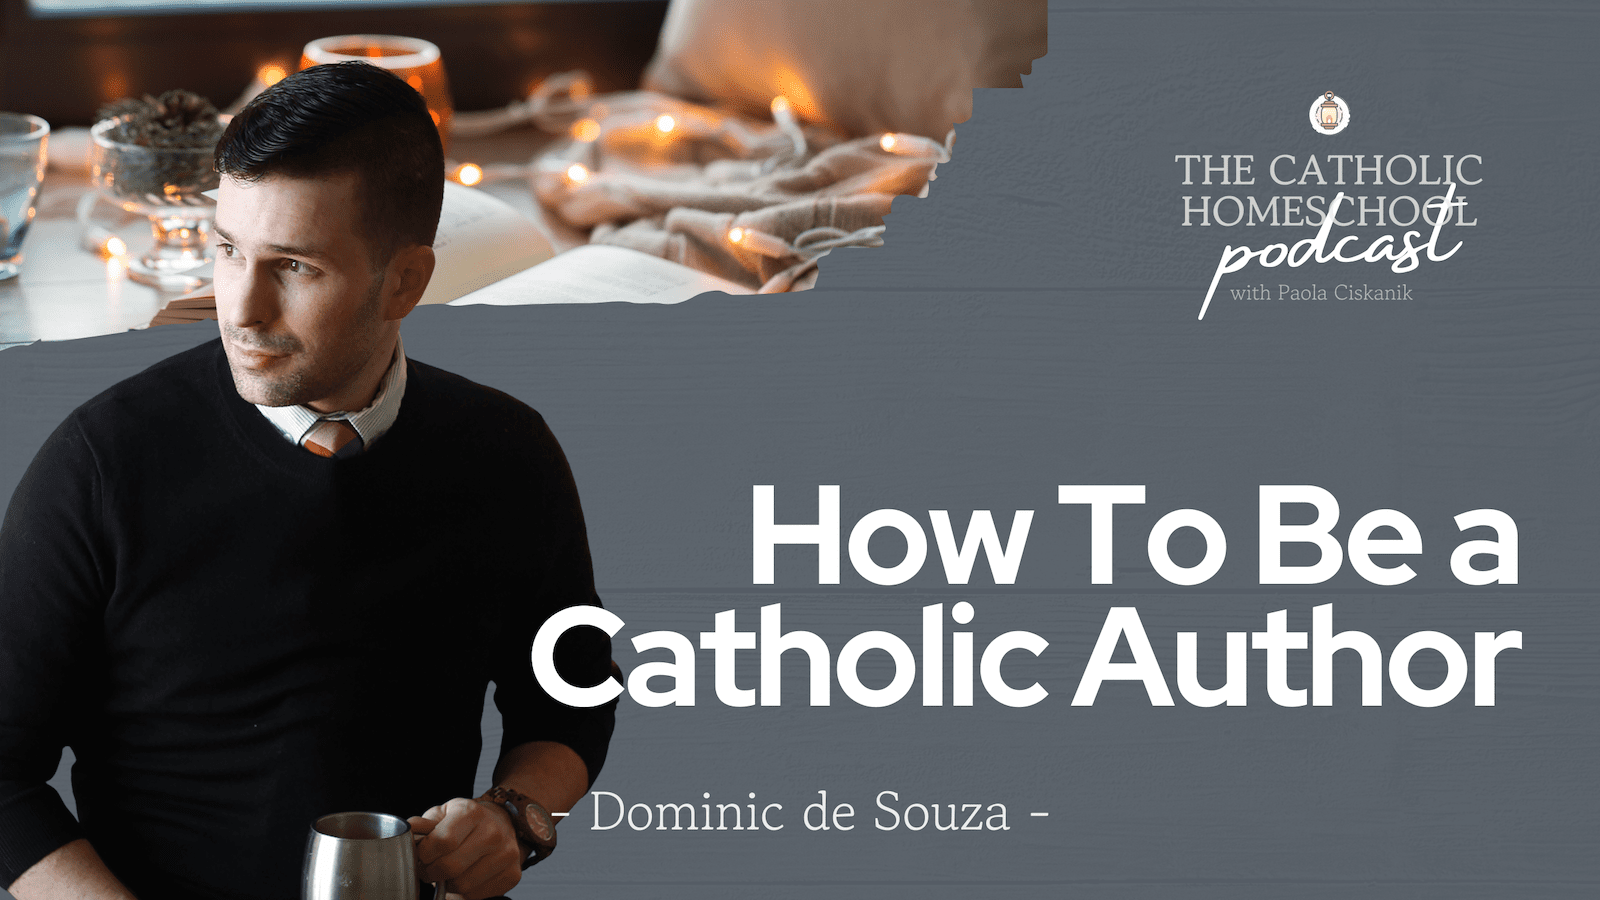 ‘How to Be a Catholic Author’ interview on the Catholic Homeschool Podcast